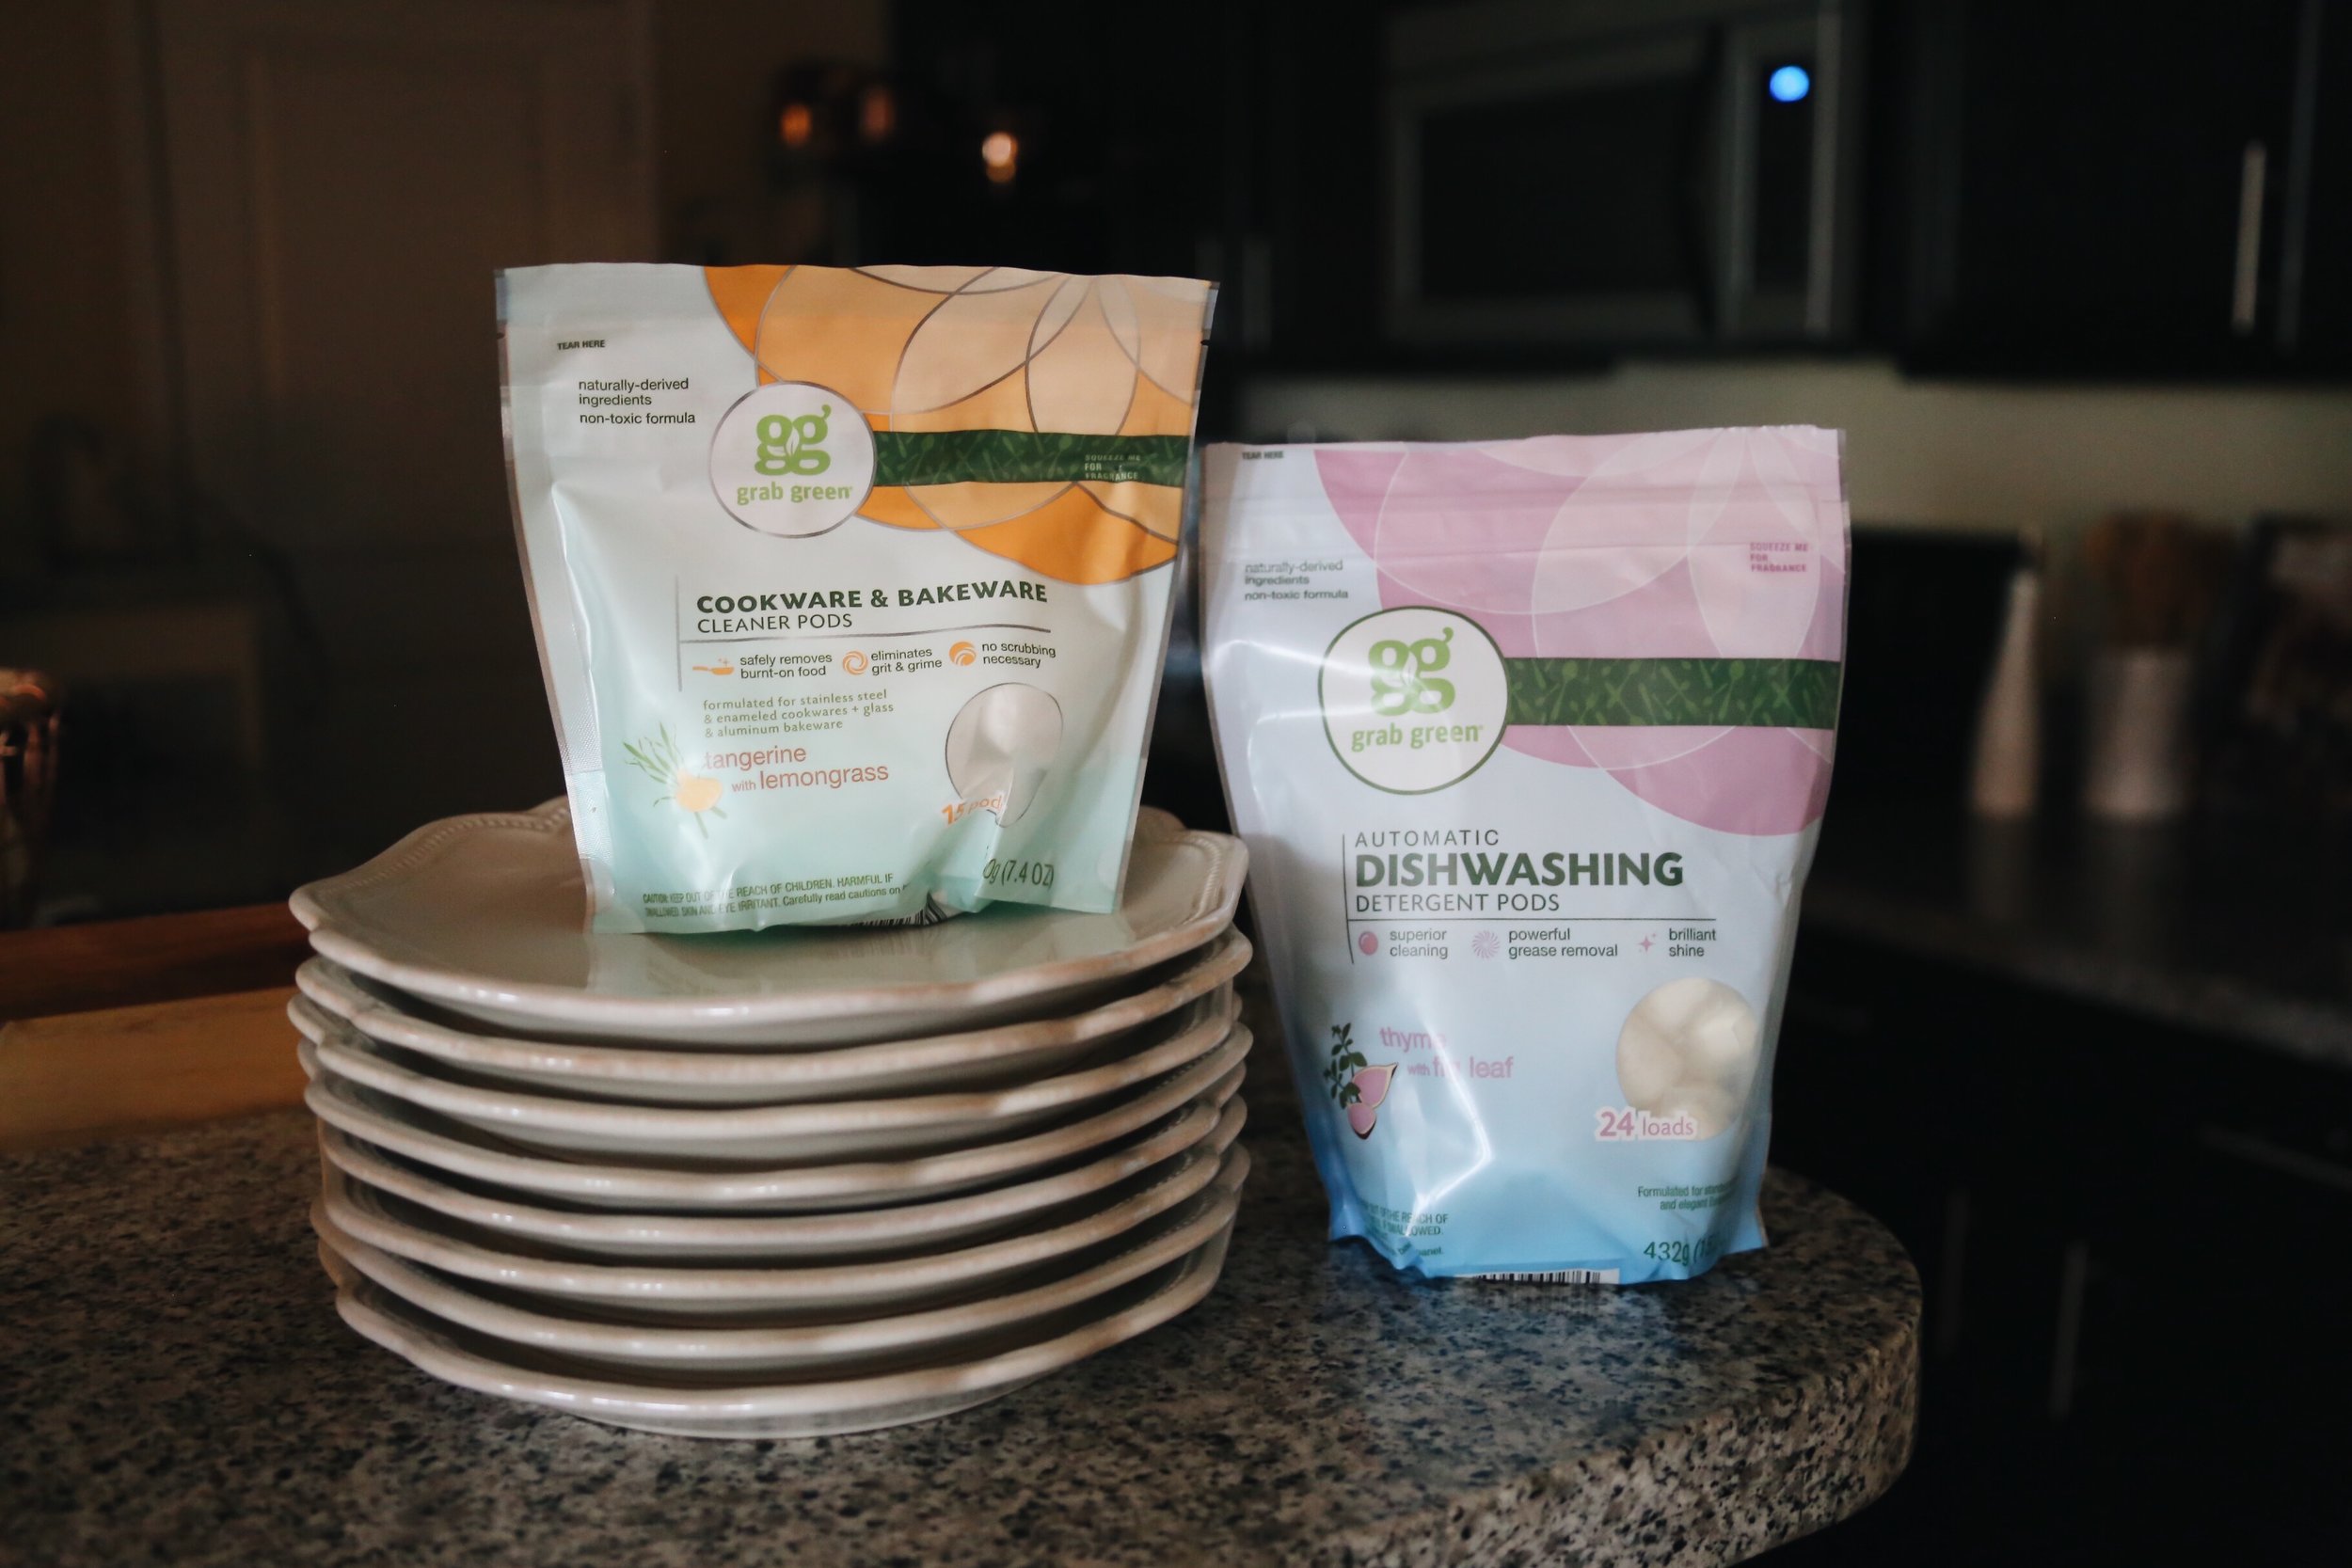  Dishwashing pods are so much eaiser than using detergent in the dishwasher. These get those dishy squeaky clean without a film of toxins that we later eat with our mean (yes, I just said it).  Even better, there are pods for cook and bakeware, too! 